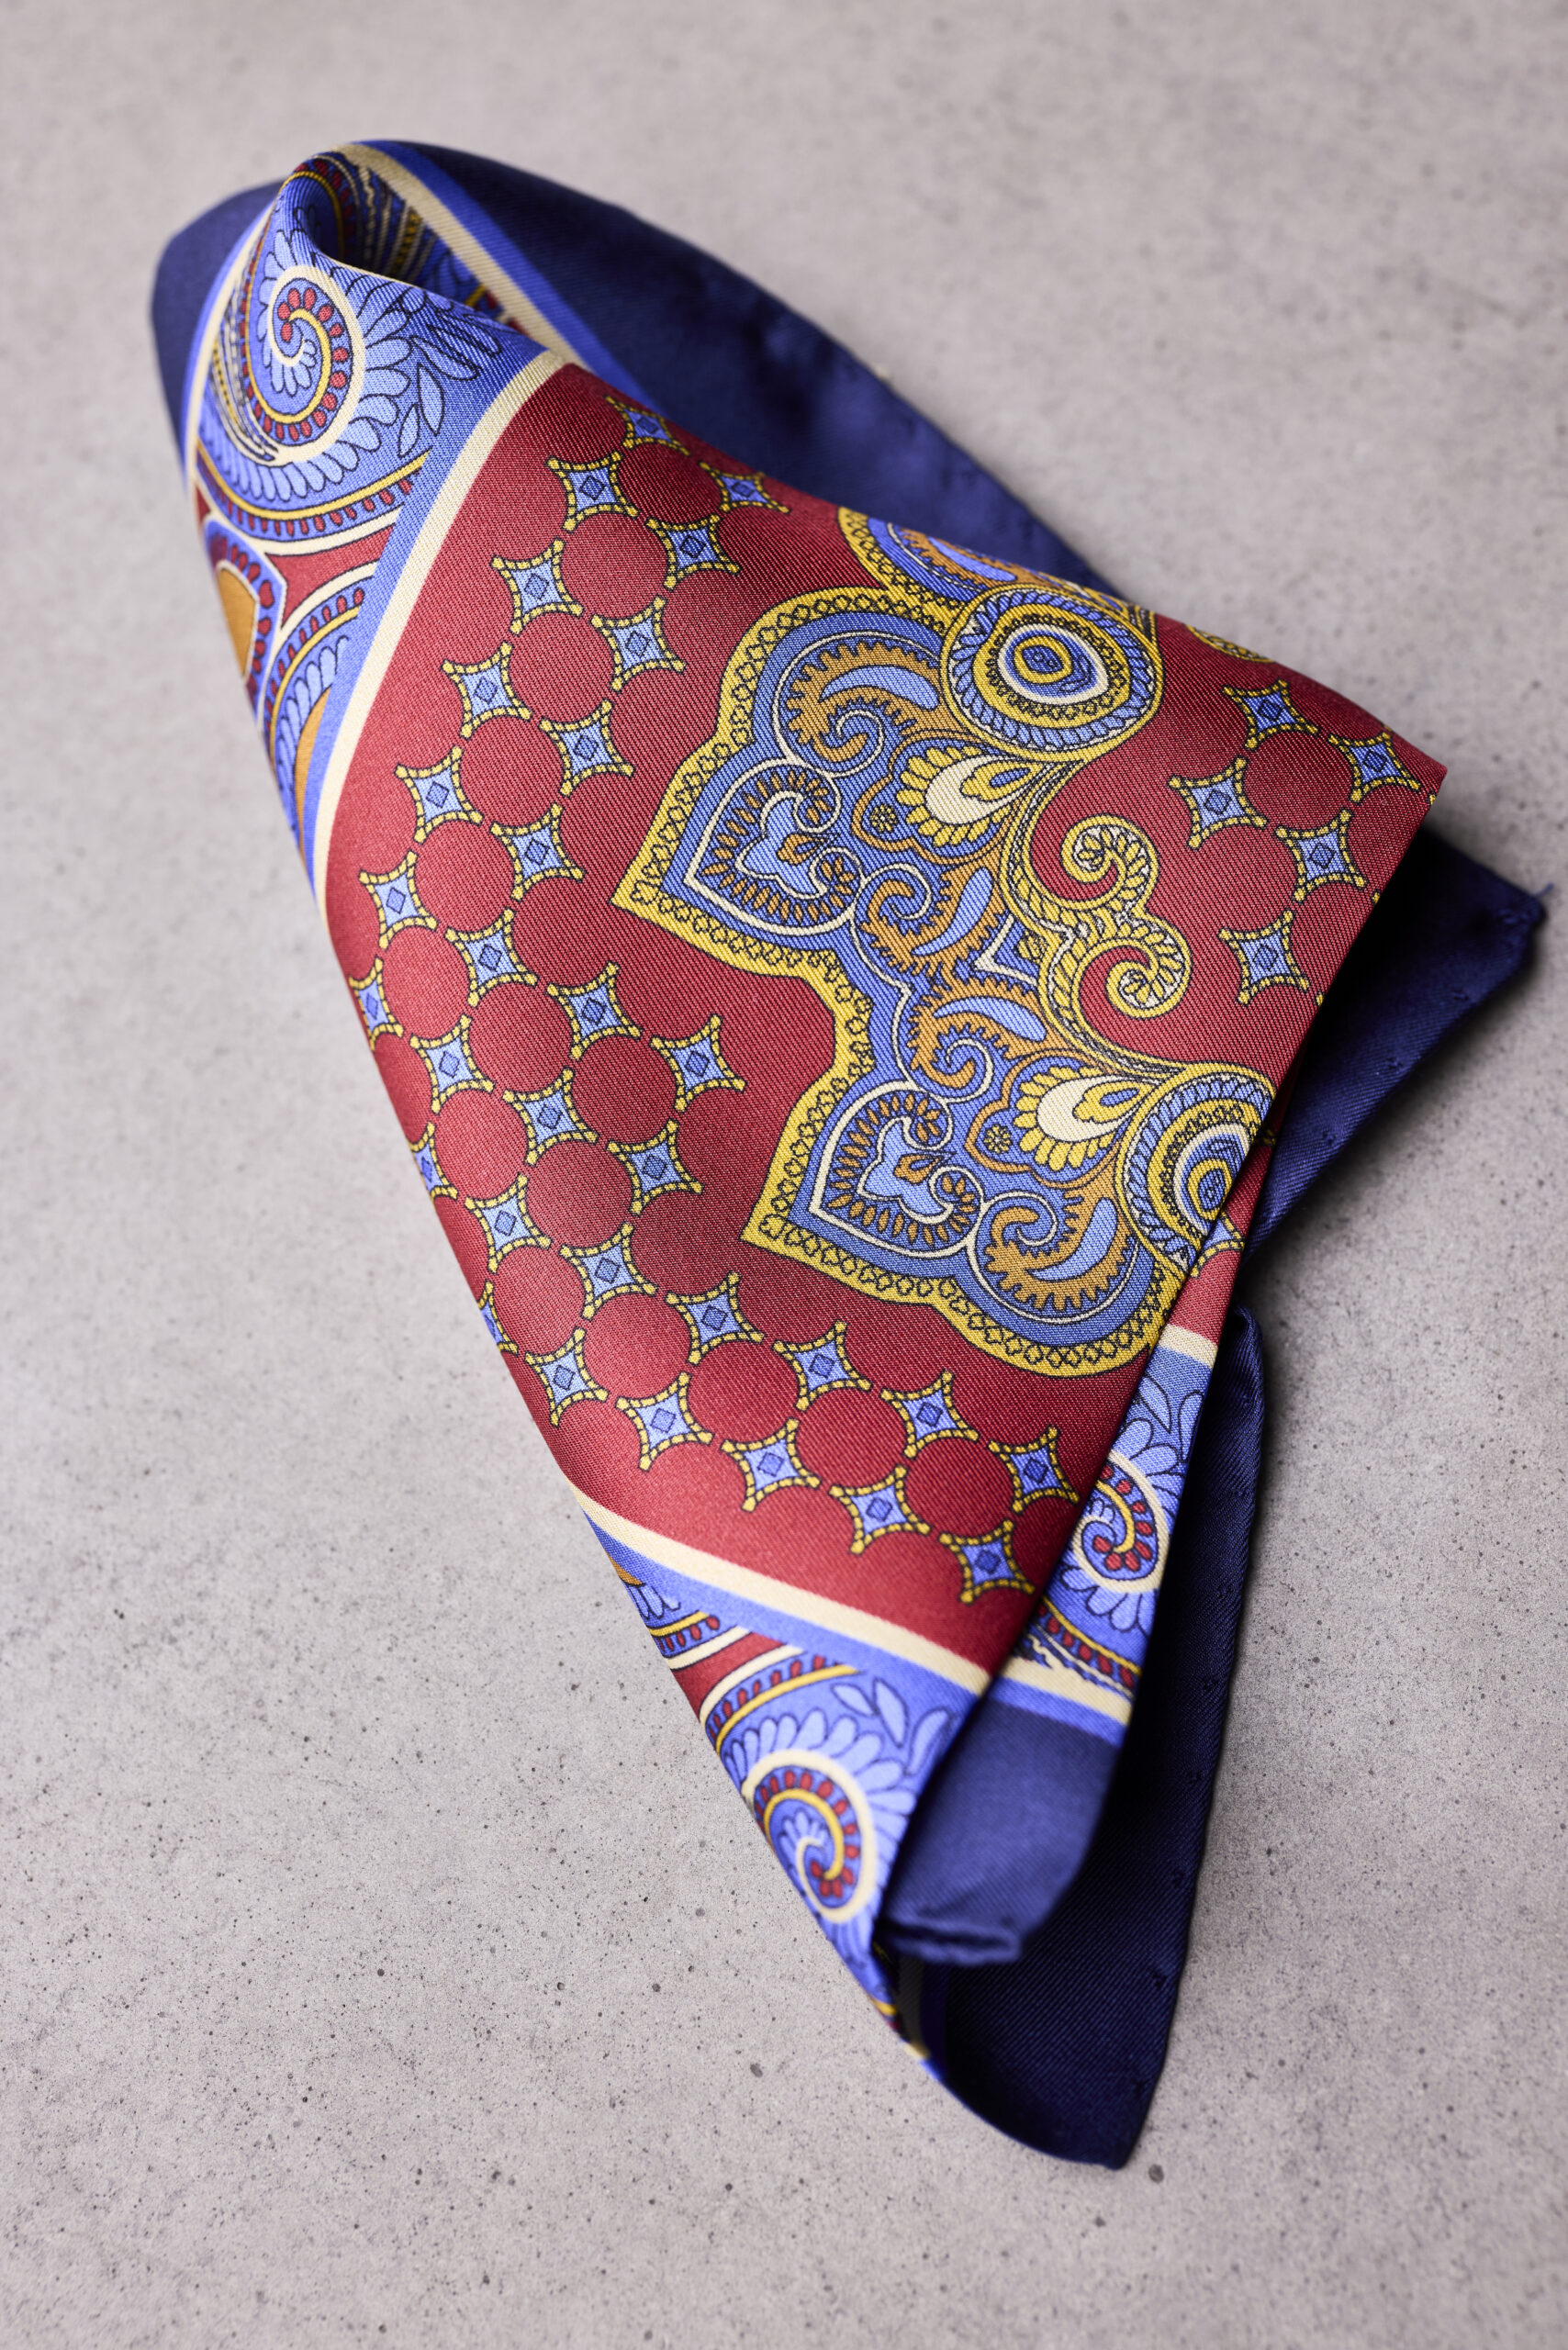 A folded red and blue paisley pocket square.